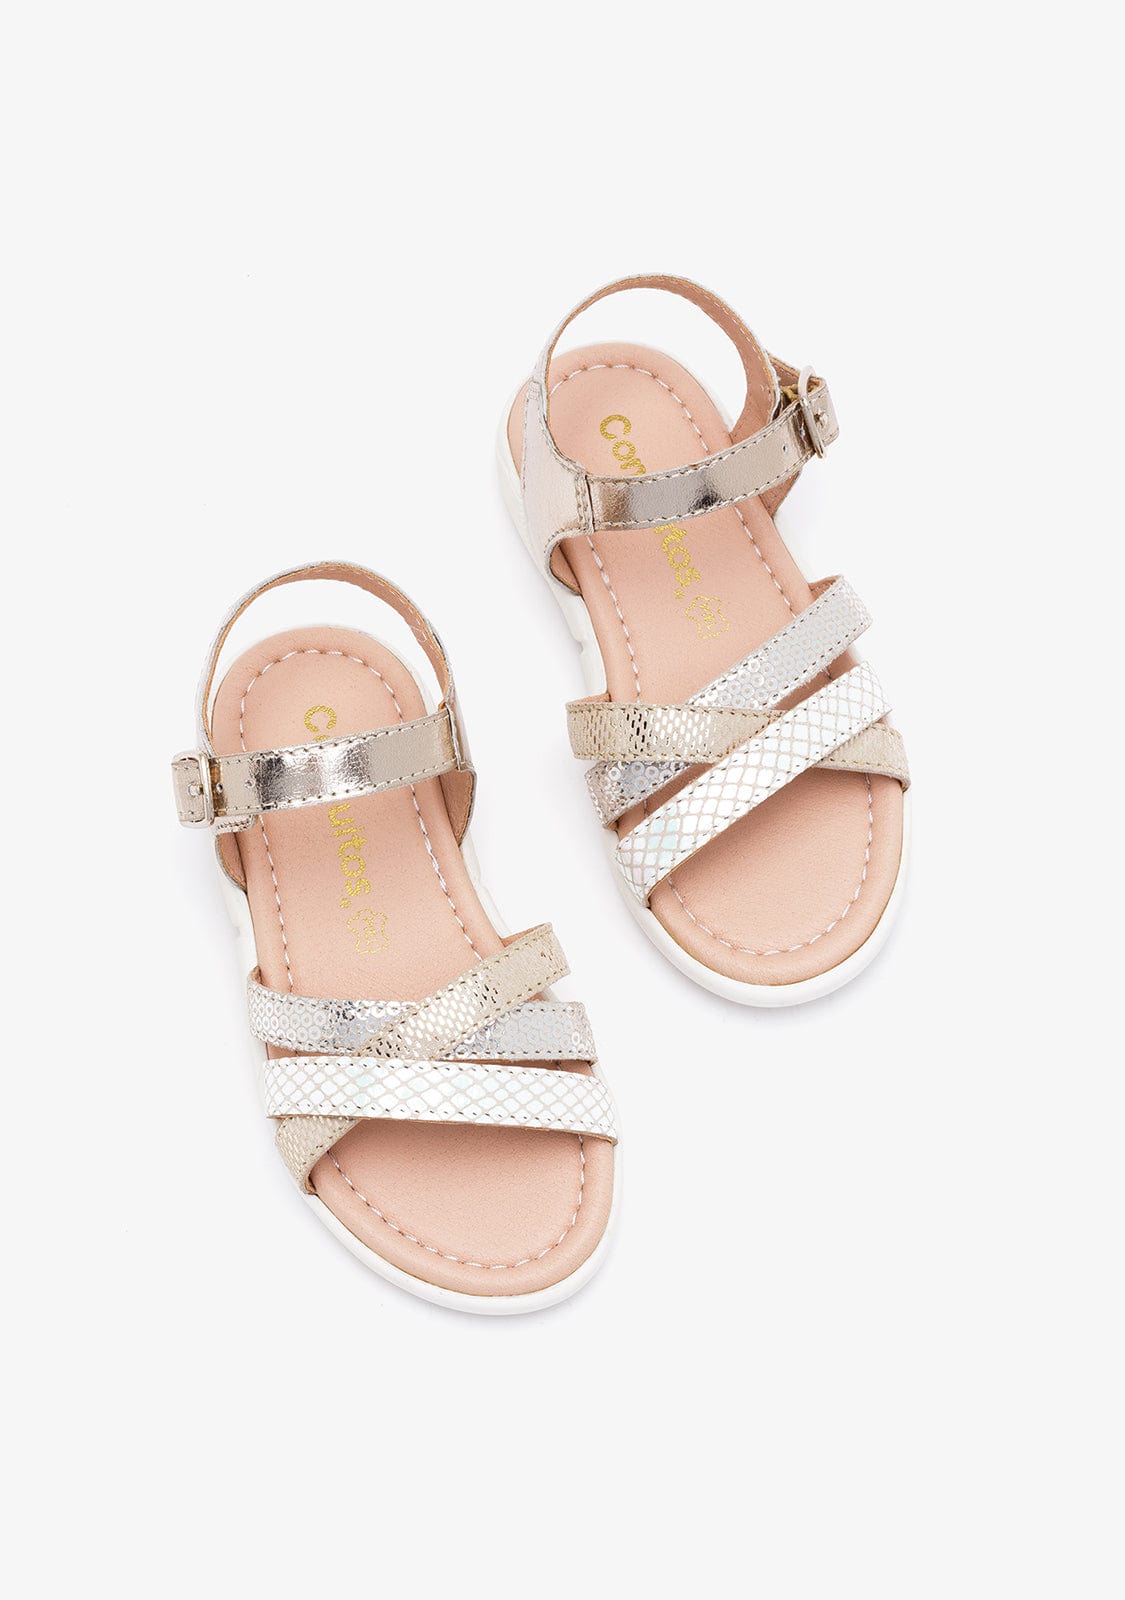 CONGUITOS Shoes Girl's Platinum Printed Leather Sandals